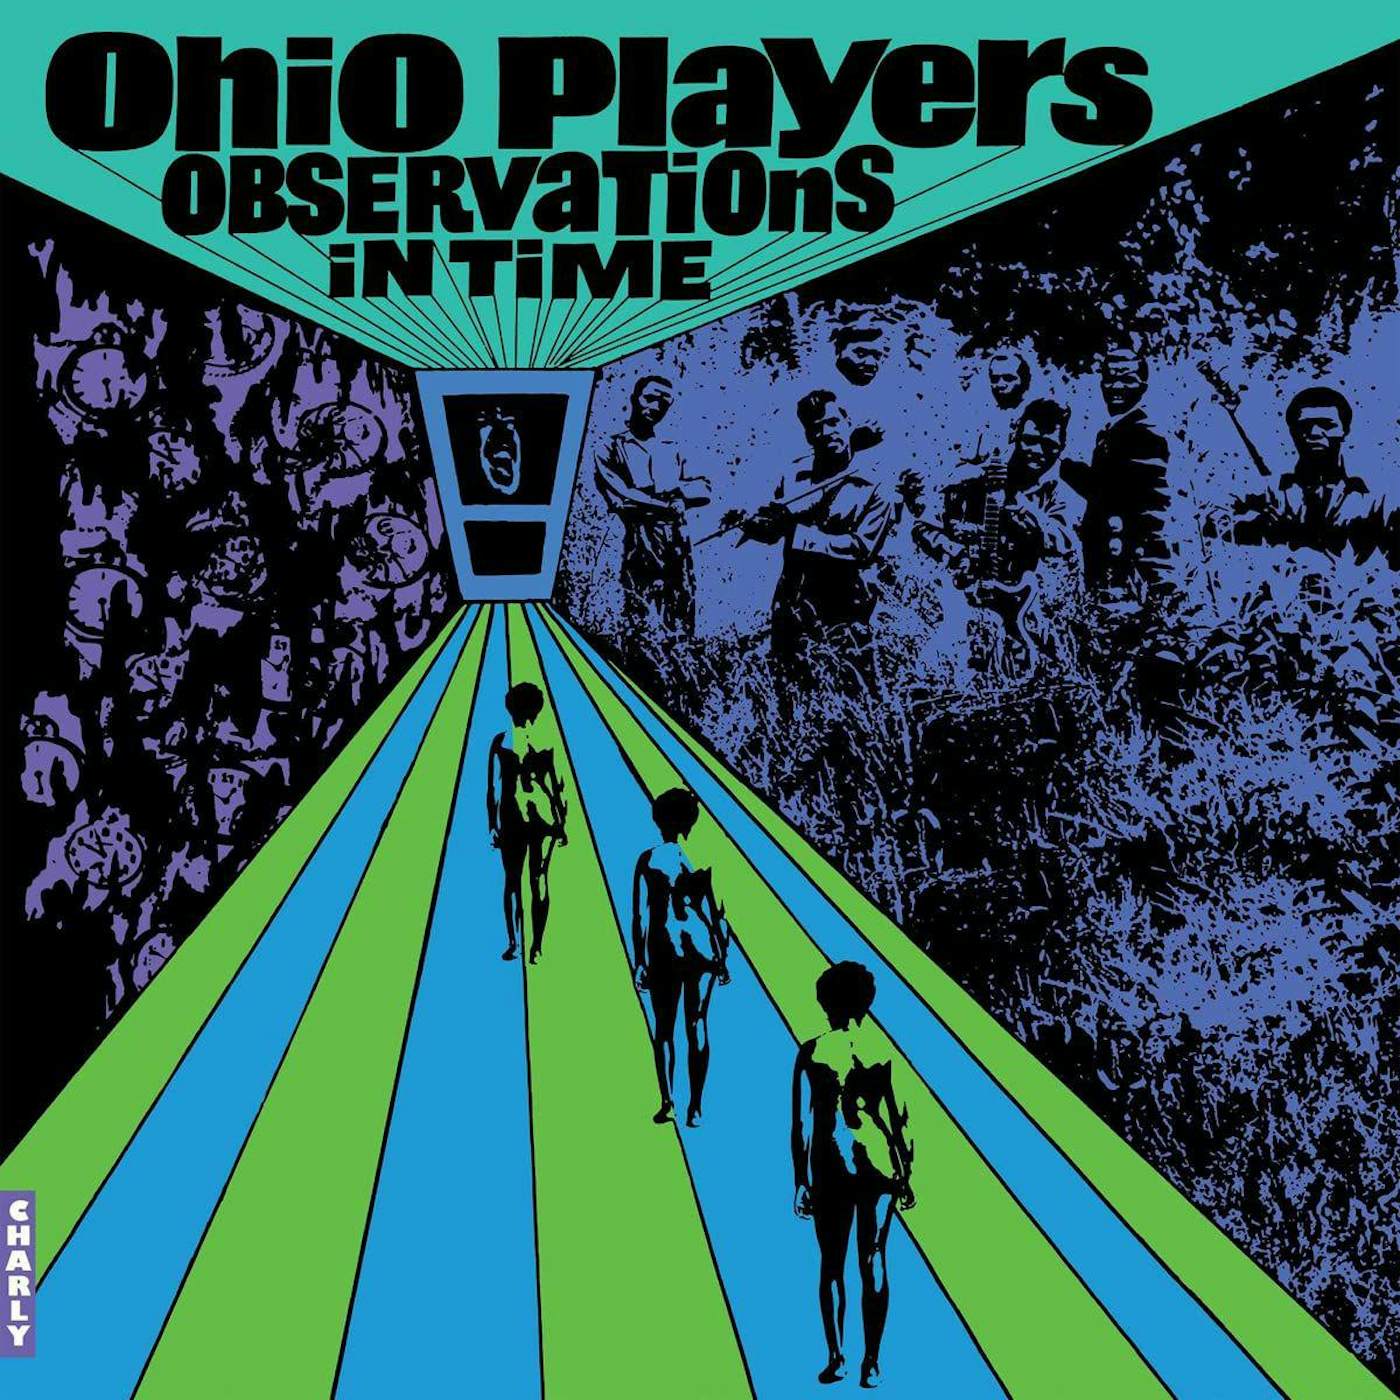 Ohio Players Observations In Time (Translucent Green Vinyl/2lp) Vinyl Record